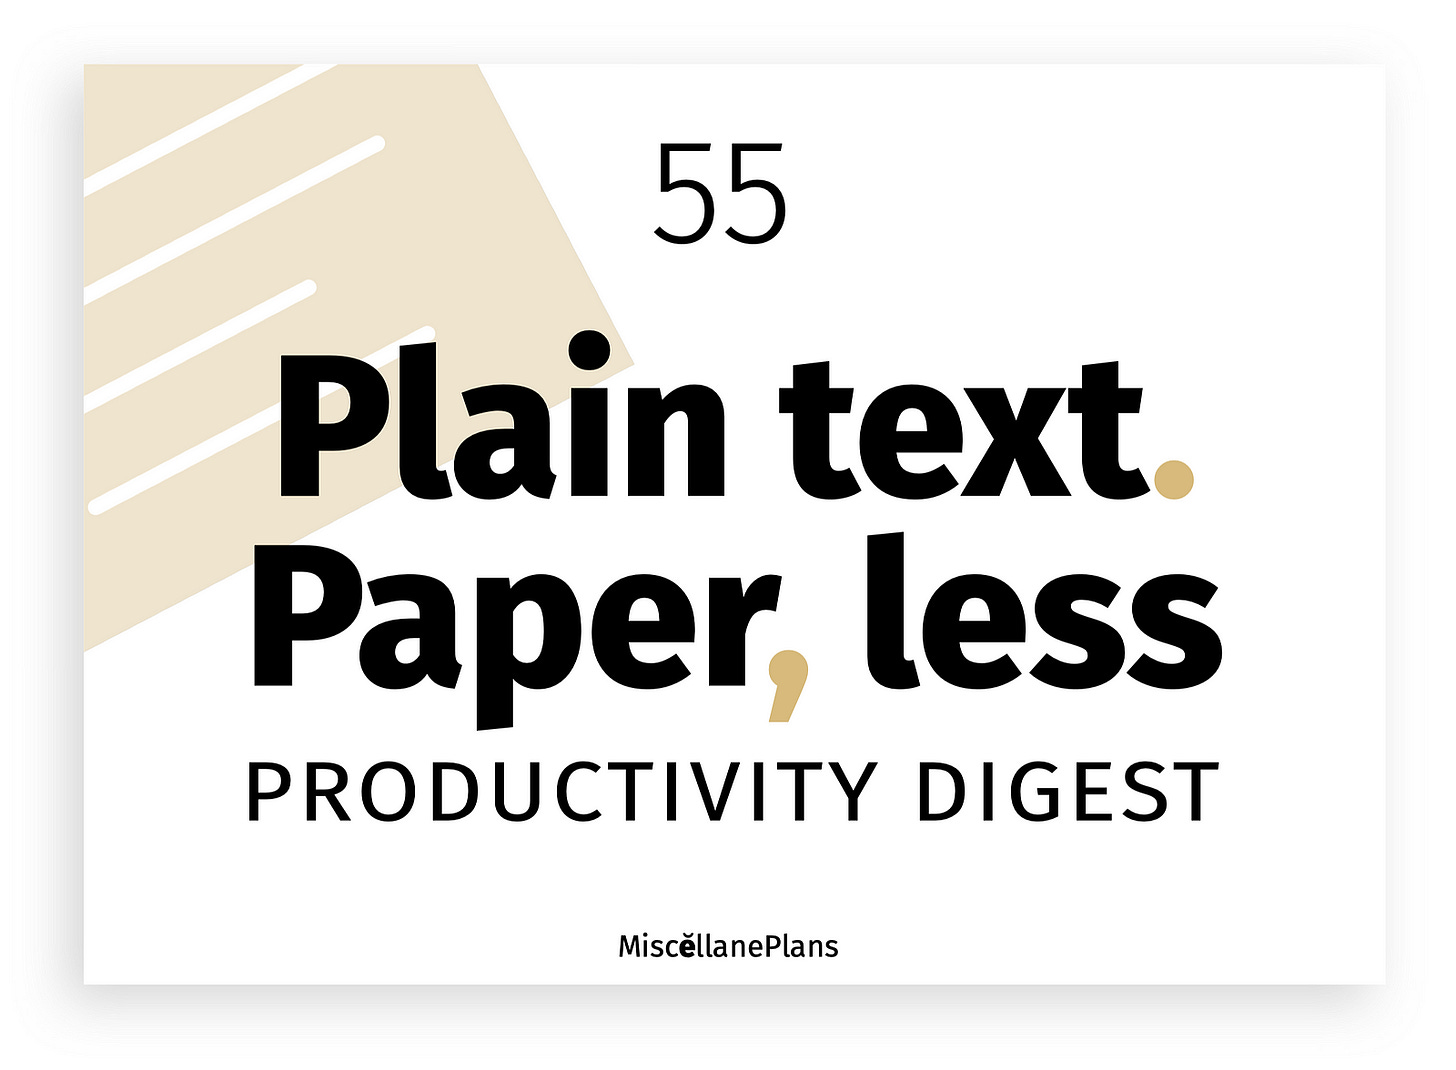 Bold black text on a white background: Plain text. Paper, less. Smaller text underneath reads PRODUCTIVITY DIGEST, and tiny text at the bottom reads MiscellanePlans. There’s a beige rectangle with white horizontal lines representing text on a page, at an angle going off the upper right of the image, and a light shadow making the entire image appear to stand out from the rest of the page.